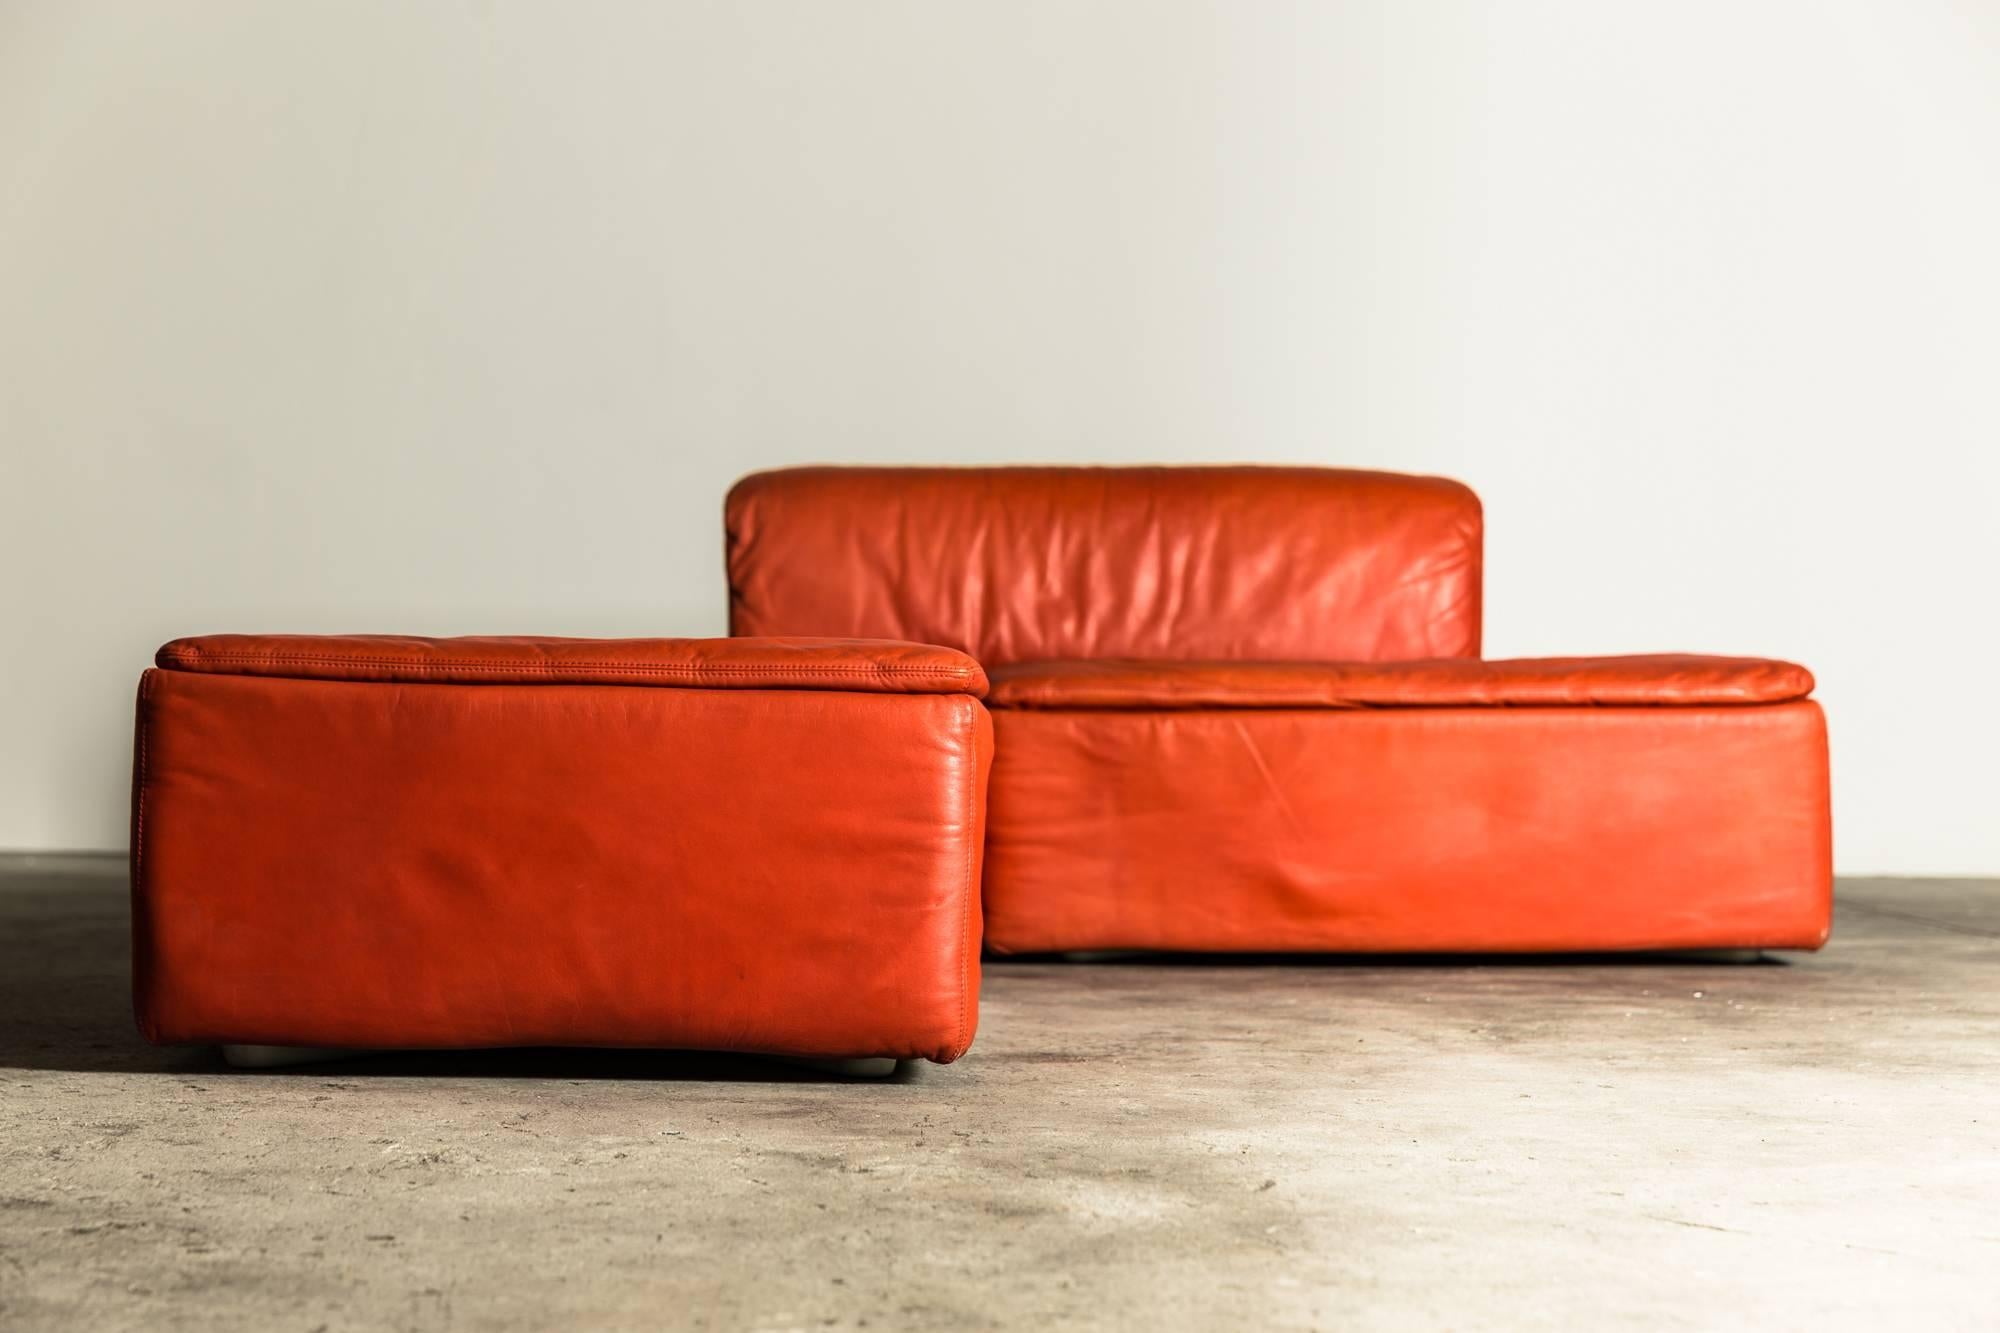 Wonderful and extremely rare modular leather sofa made up of three elements in great original condition. Each module measures approximately 105 x 70 x 70 H cm.